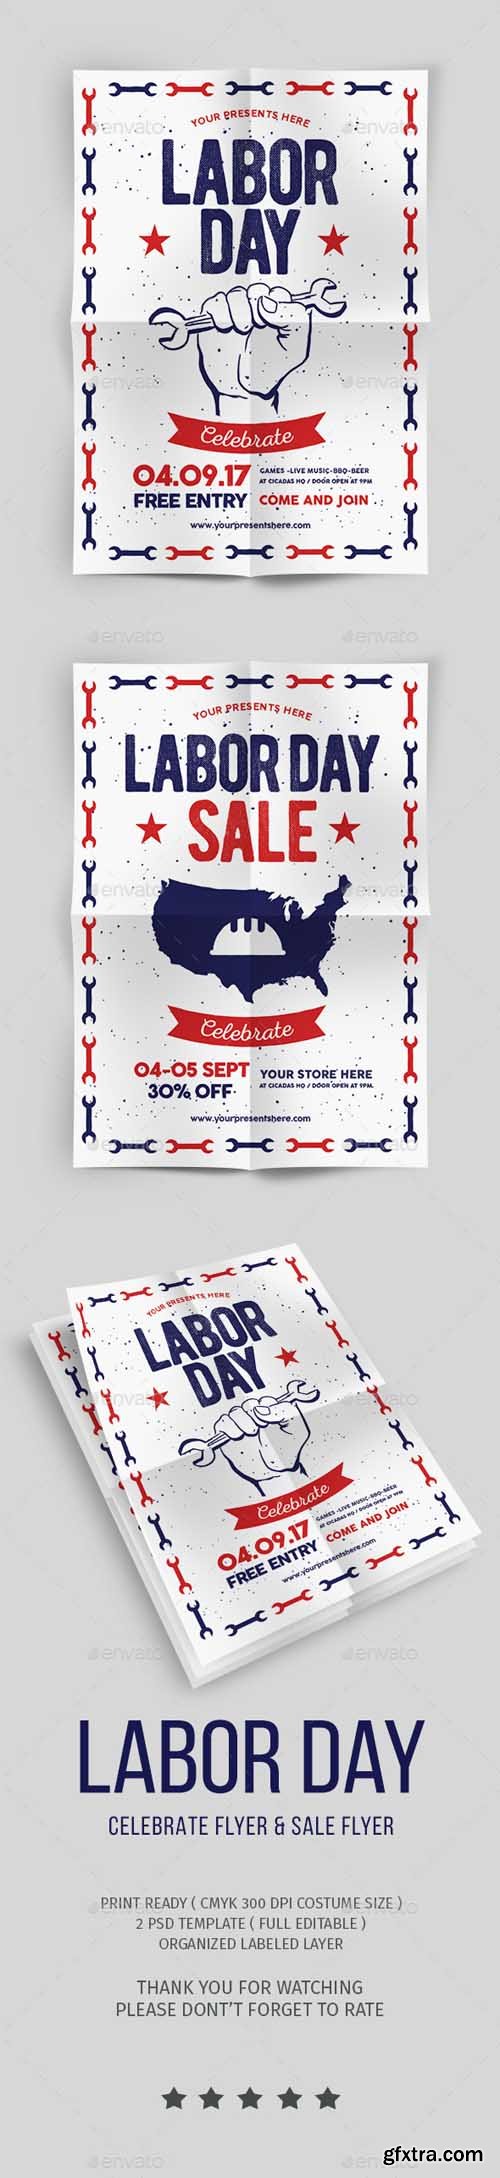 GR - Labor Day Flyer & labor Day Sale Flyer 20514194